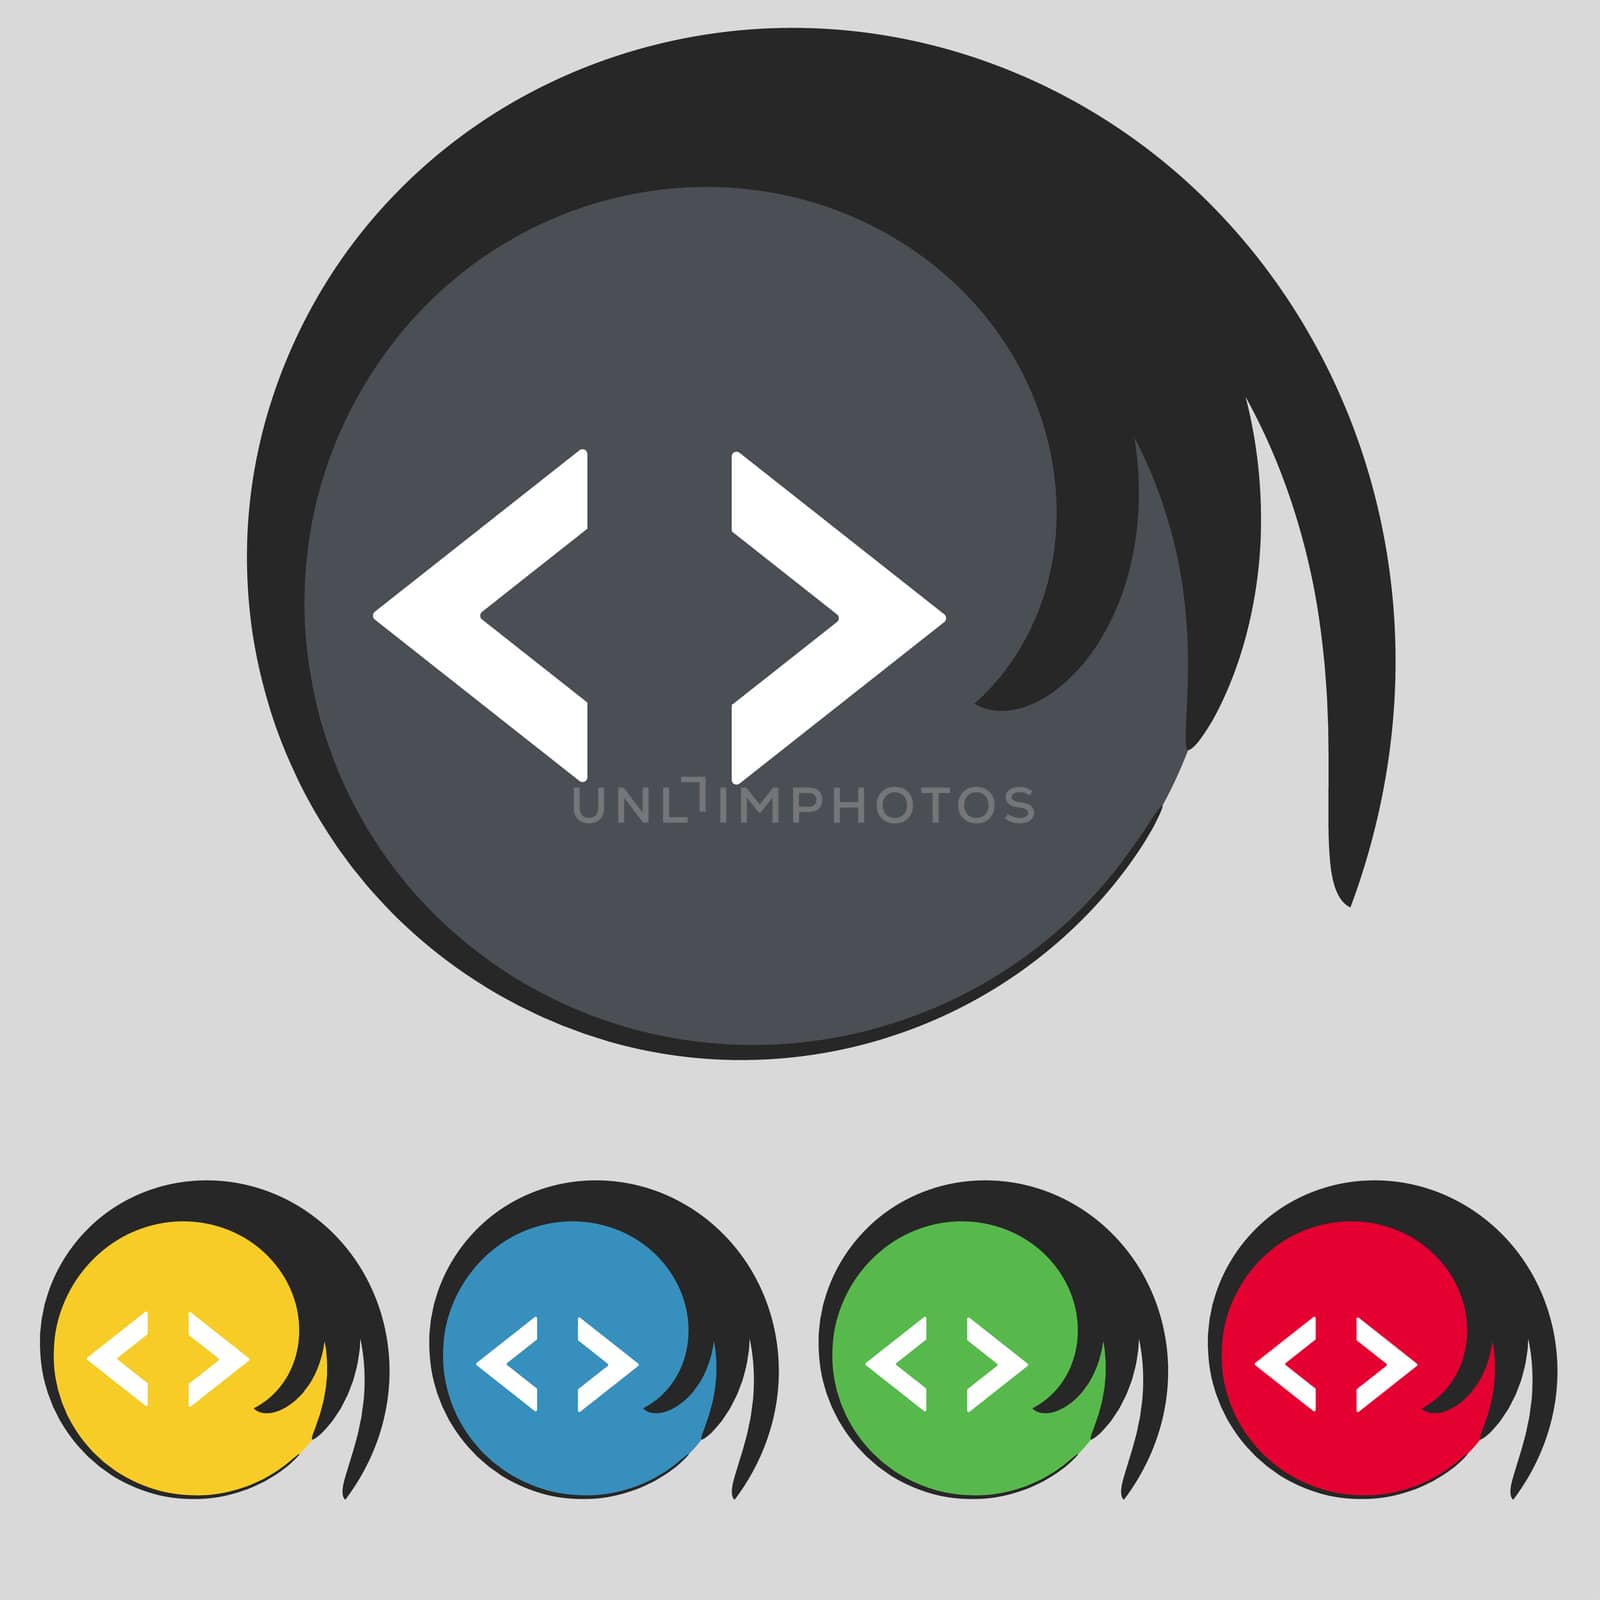 Code sign icon. Programmer symbol. Set of colored buttons. illustration